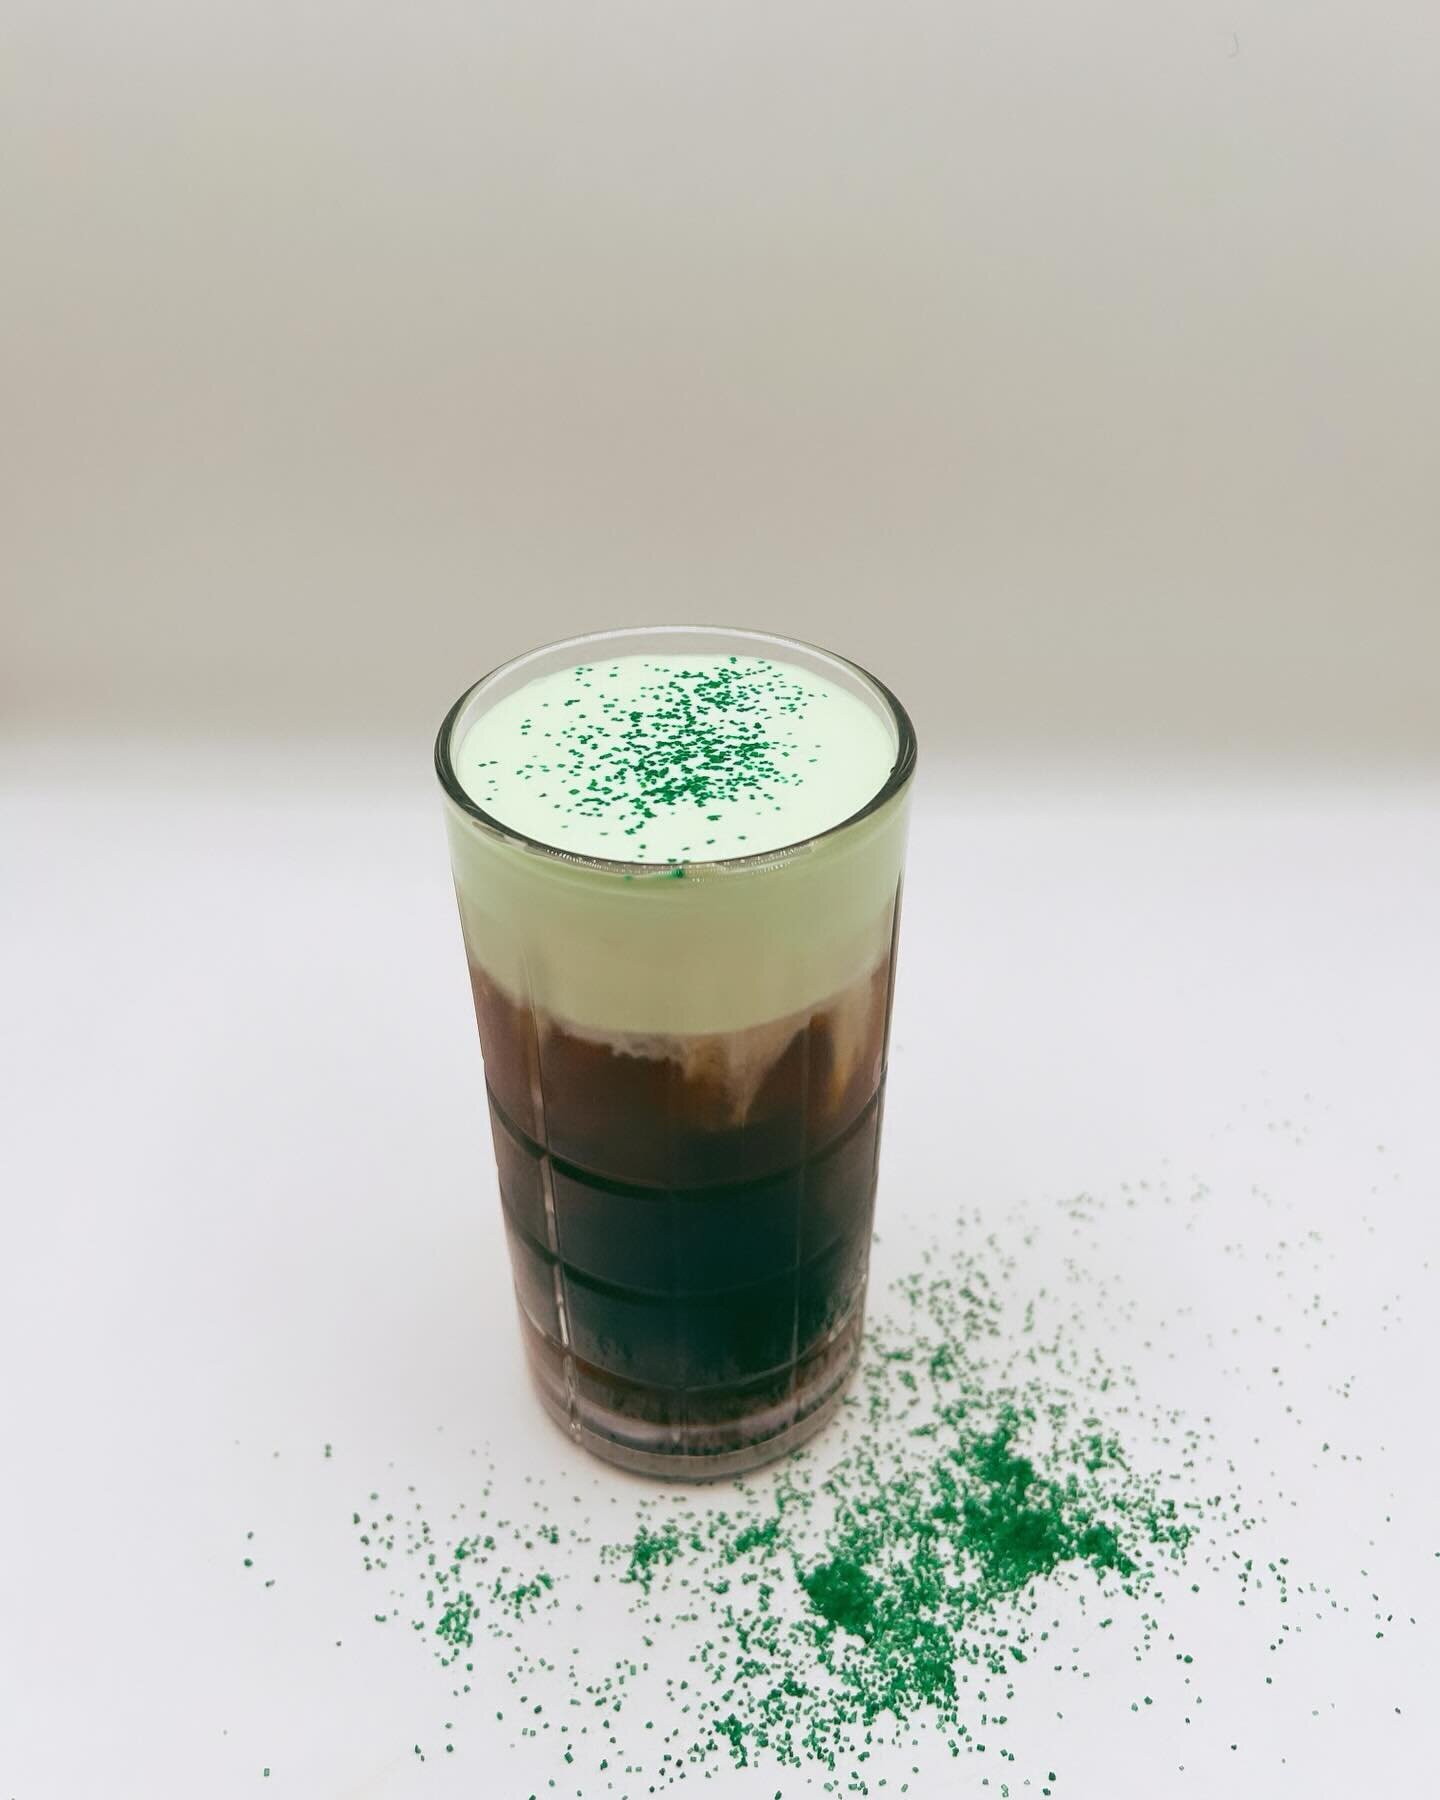 It&rsquo;s Shamrock season so we brought back a classic ☘️&nbsp;&nbsp;
The Shamrock: Vanilla cold brew topped with green Irish cream foam and sprinkles! Smooth, creamy and delicious! Grab one this week 🌈🍀 

#stpattysday #luckoftheirish #spring2024 